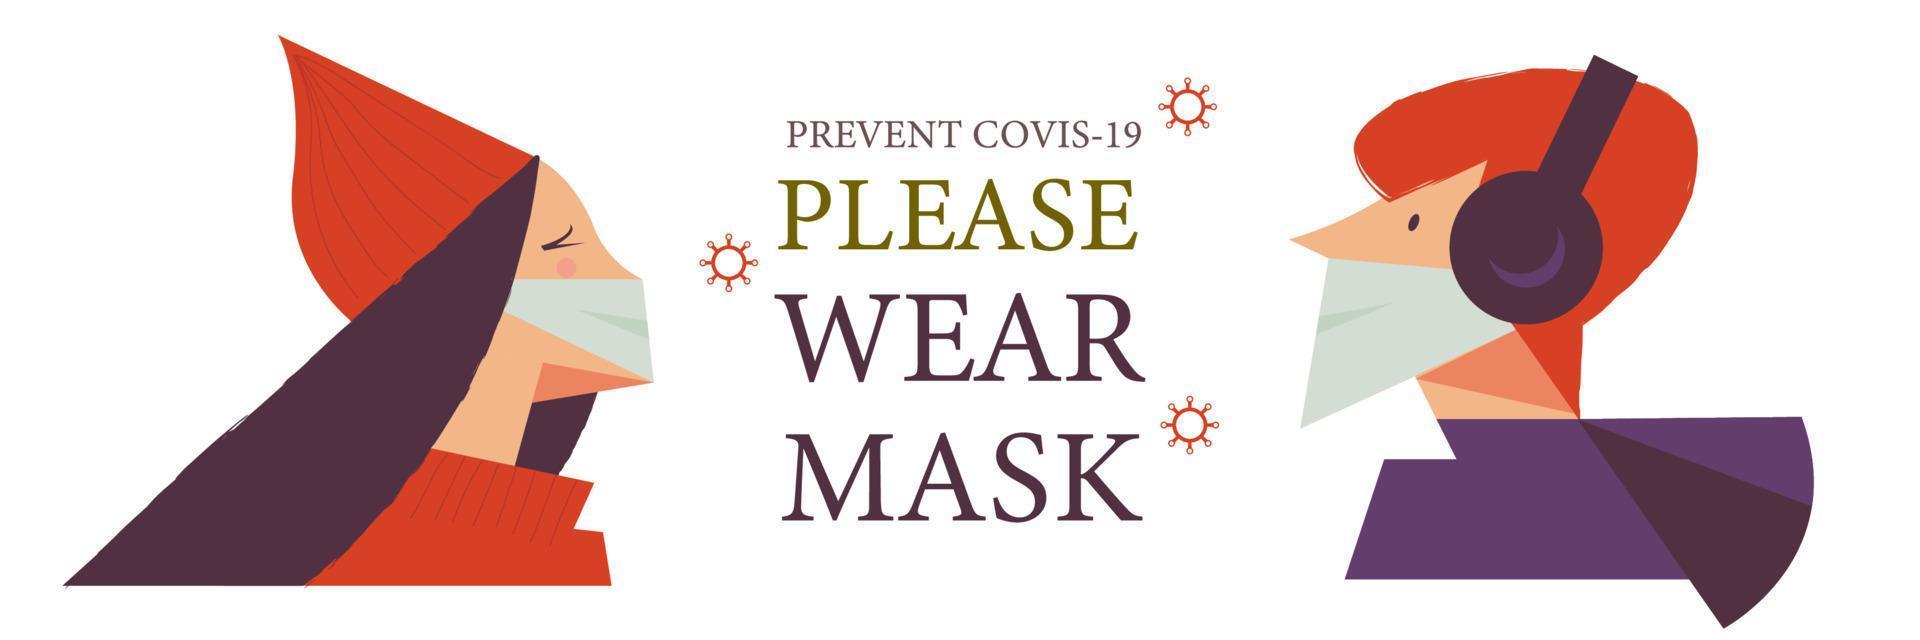 Please put on your mask. Vector poster encouraging people to wear masks during the coronavirus pandemic.